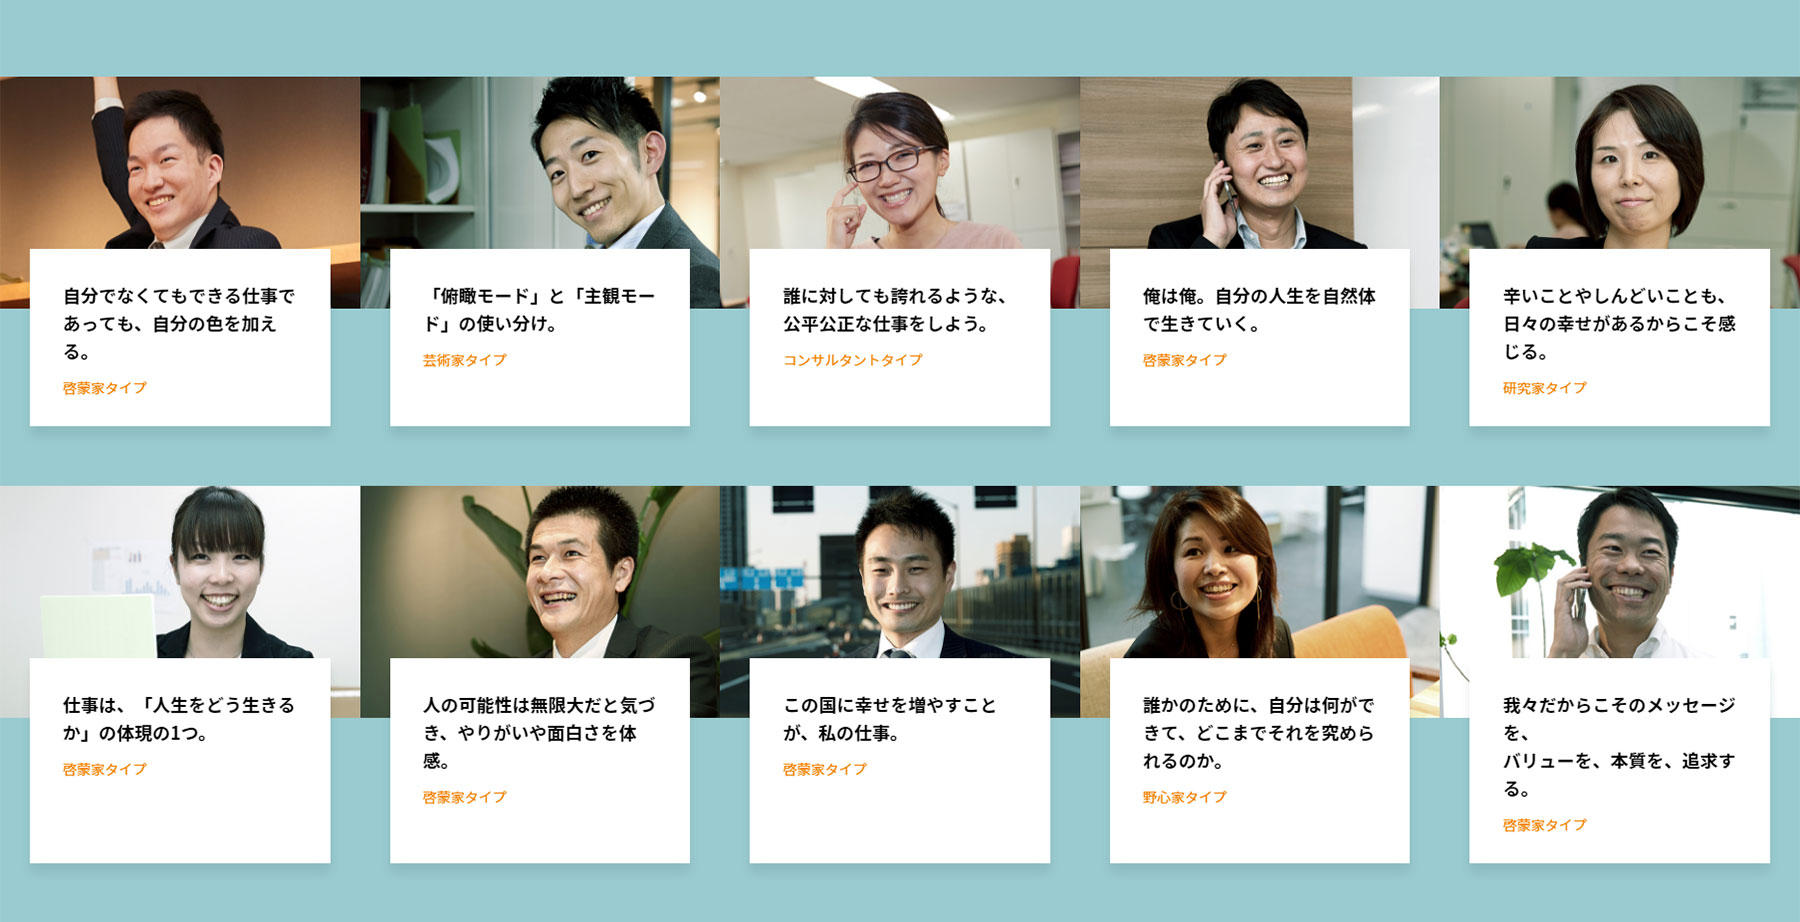 shake inc. recruitment site - Website of the Day